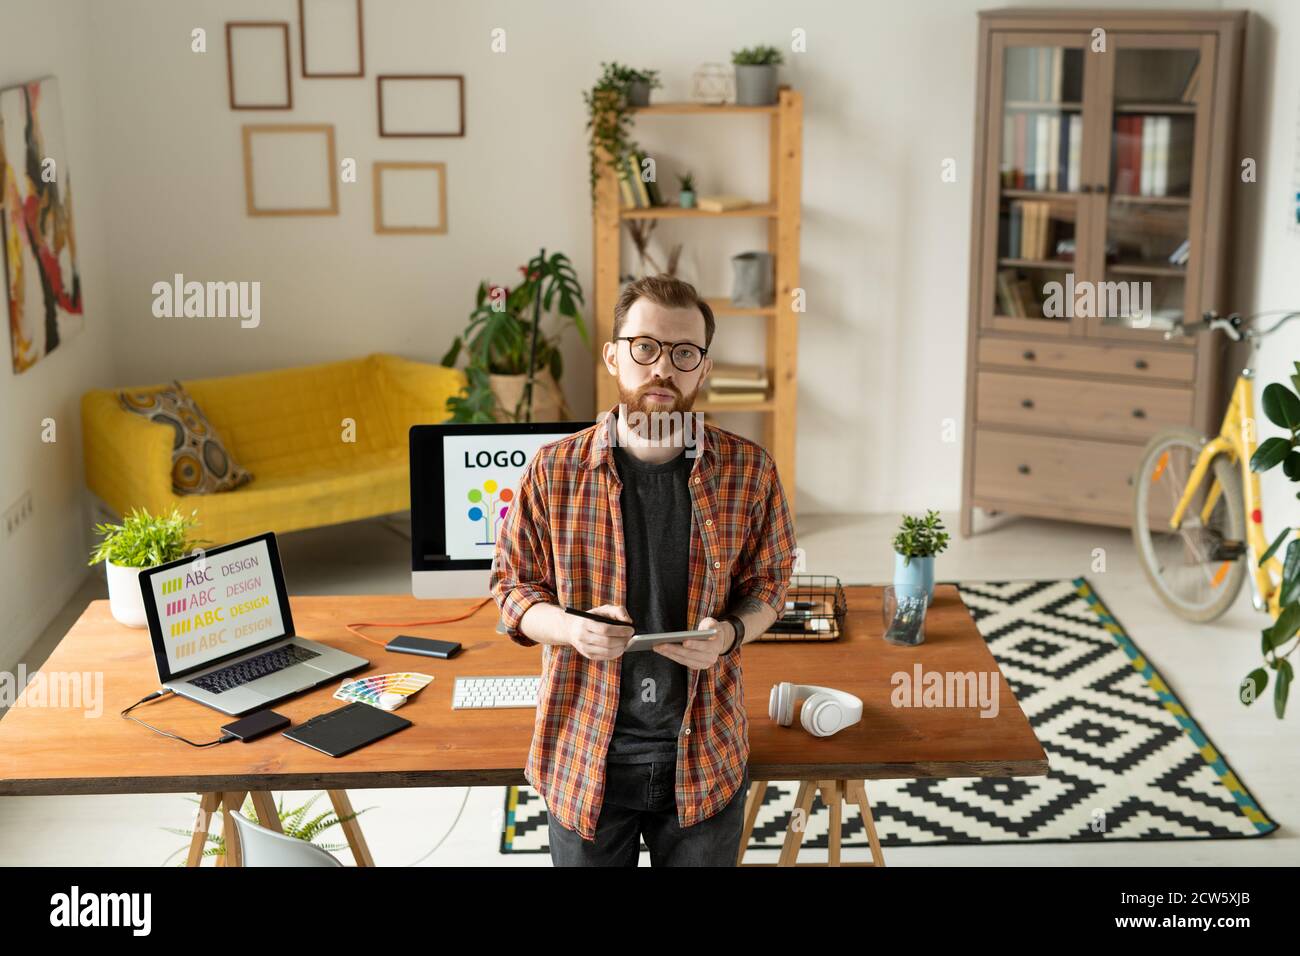 Serious creative designer standing by table with computer monitor on background Stock Photo